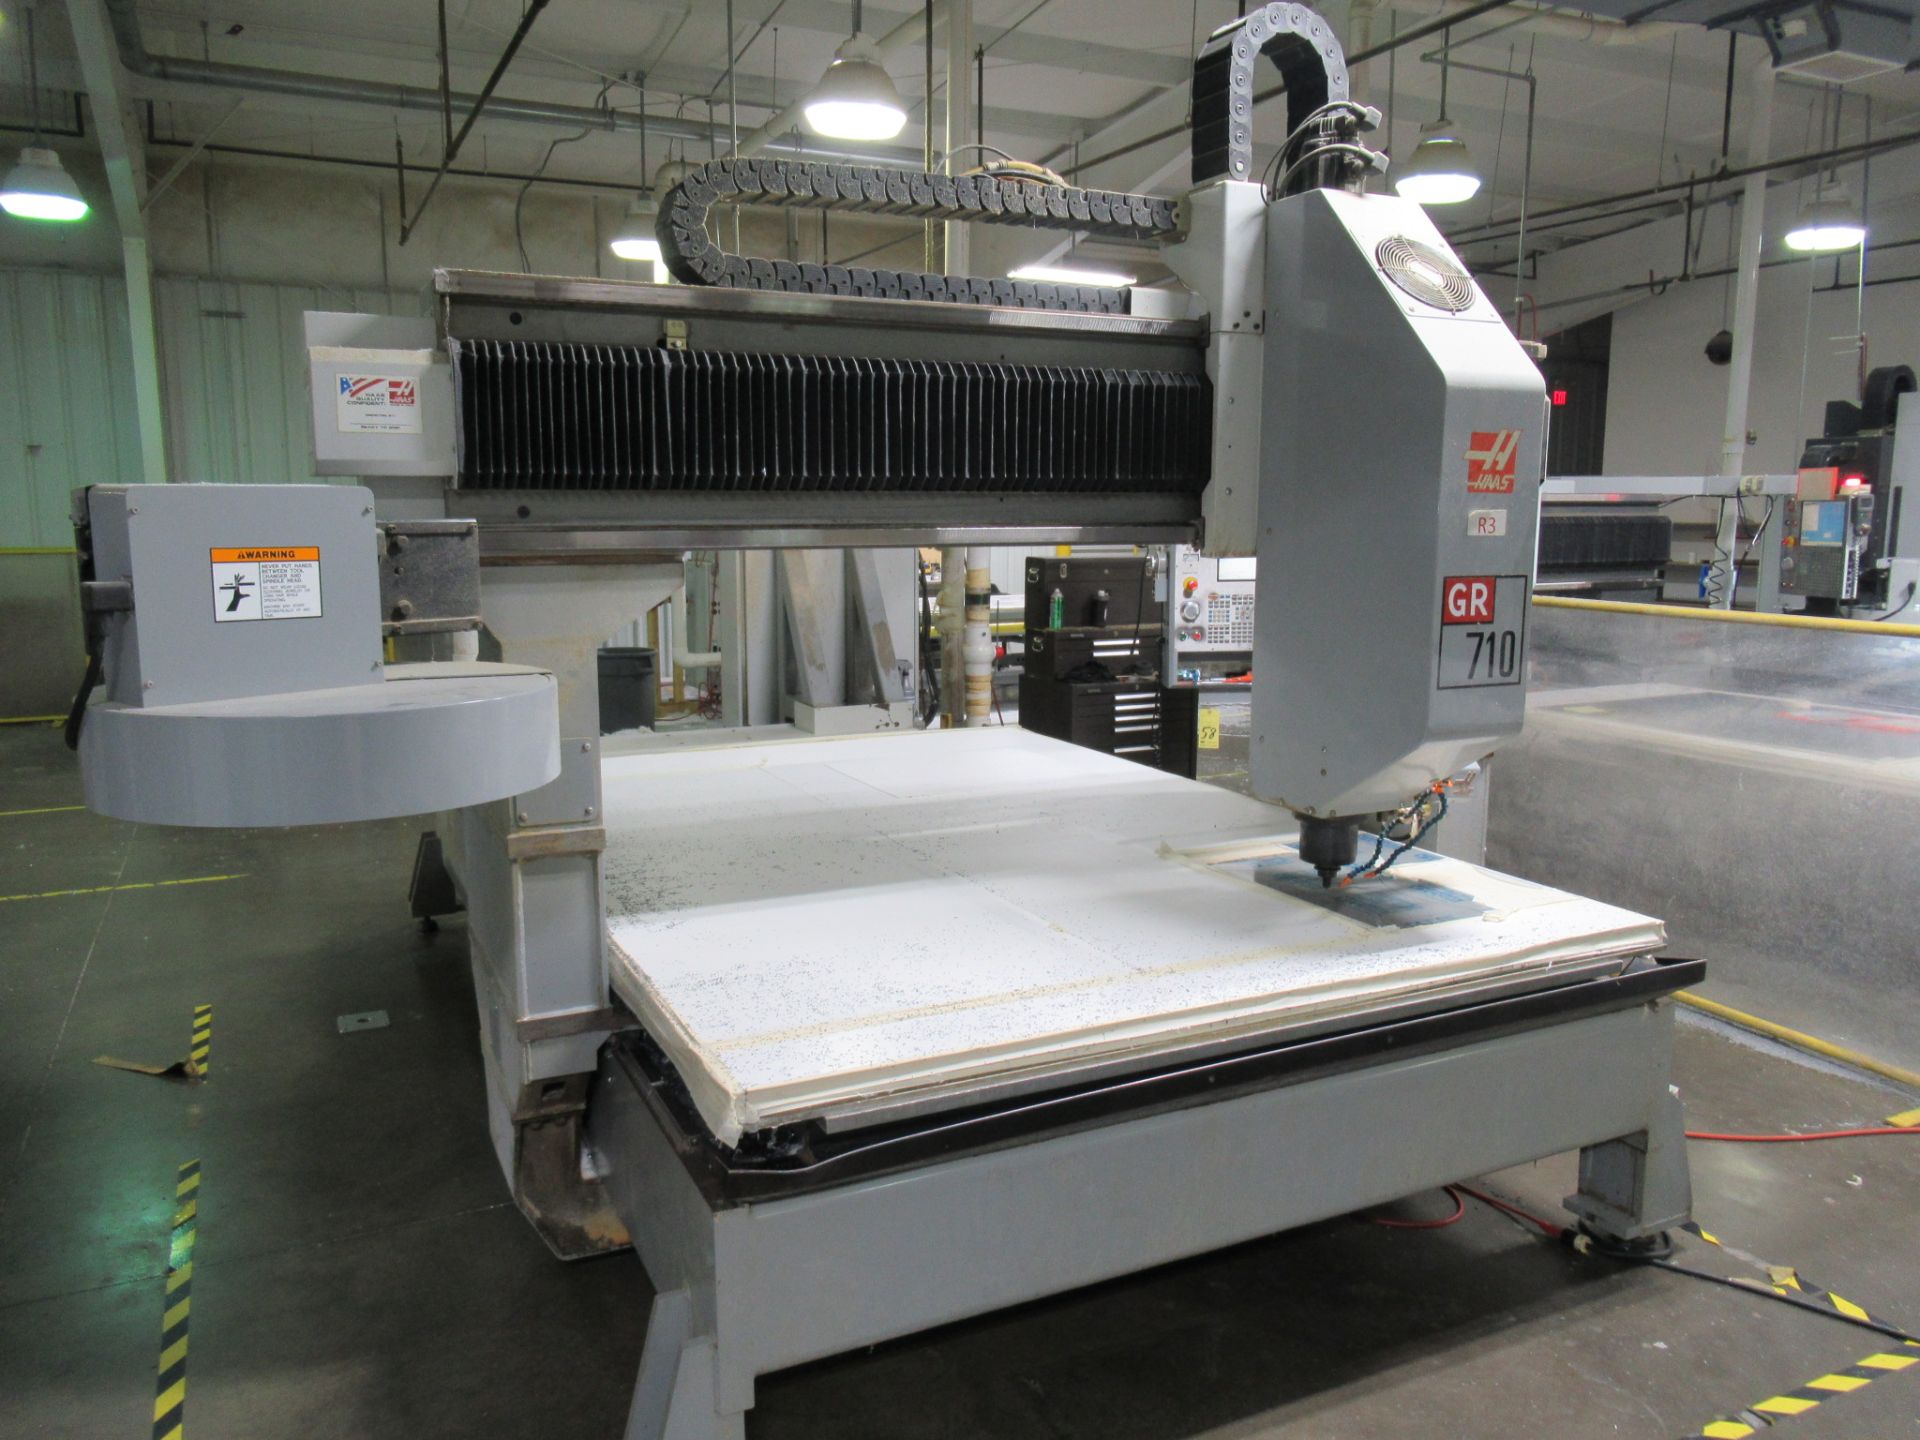 HAAS GR-710 CNC GANTRY ROUTER, New in 2006, 72” x 122” vacuum table, Travels: 121”-X, 85”-Y, 24”Z, - Image 4 of 7